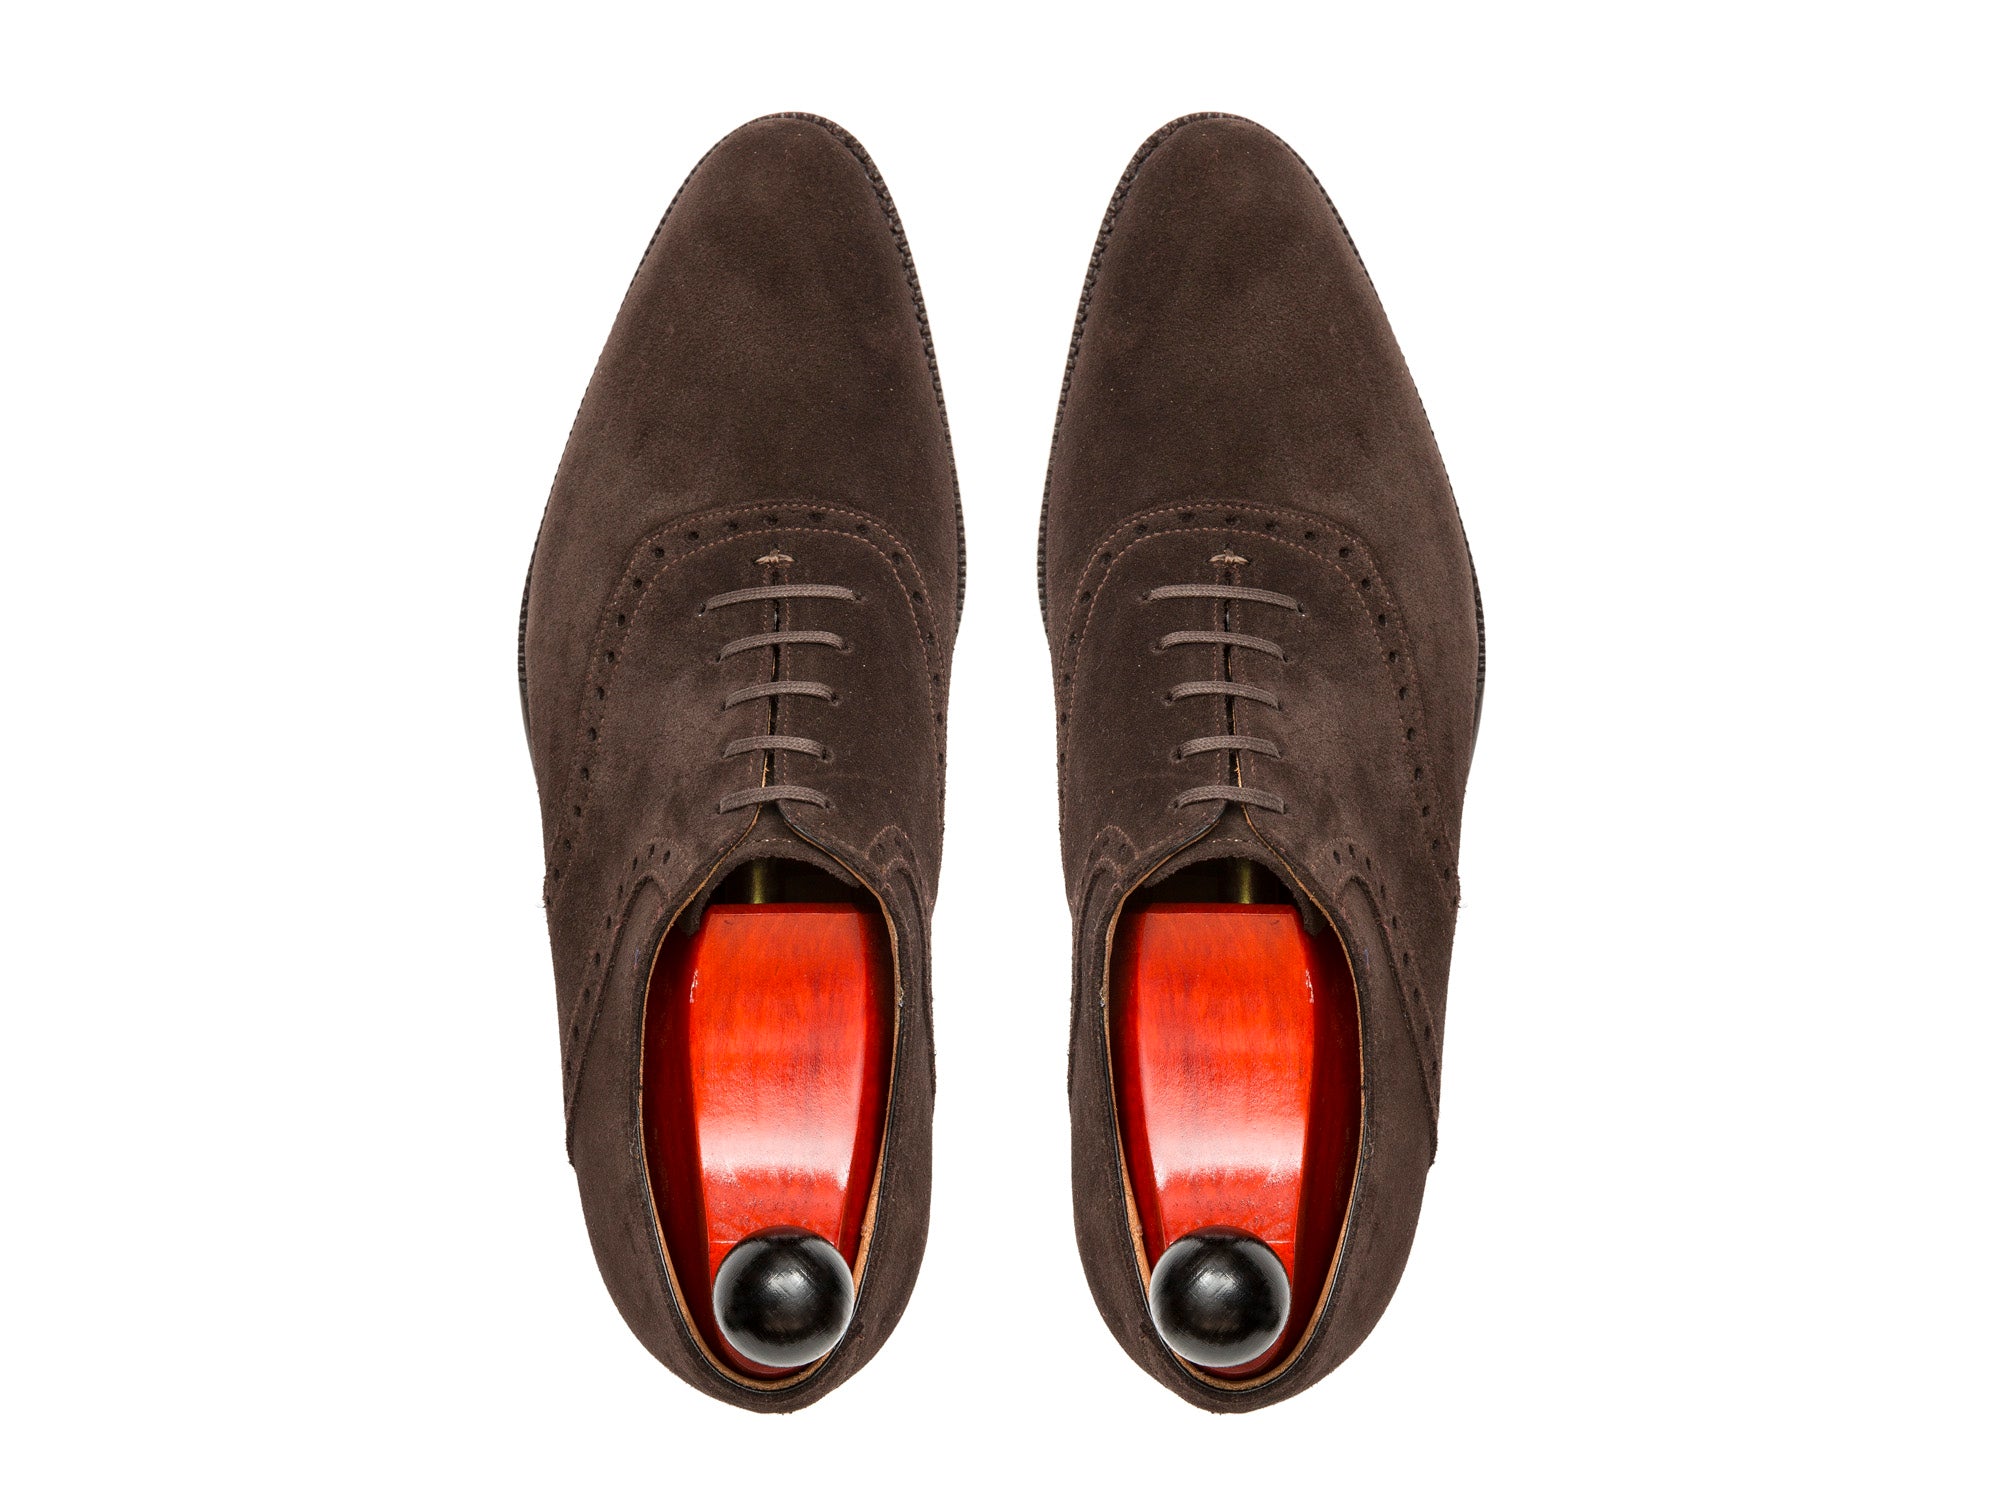 Stefano - MTO - Bitter Chocolate Suede - JKF Last - Single Leather Sole